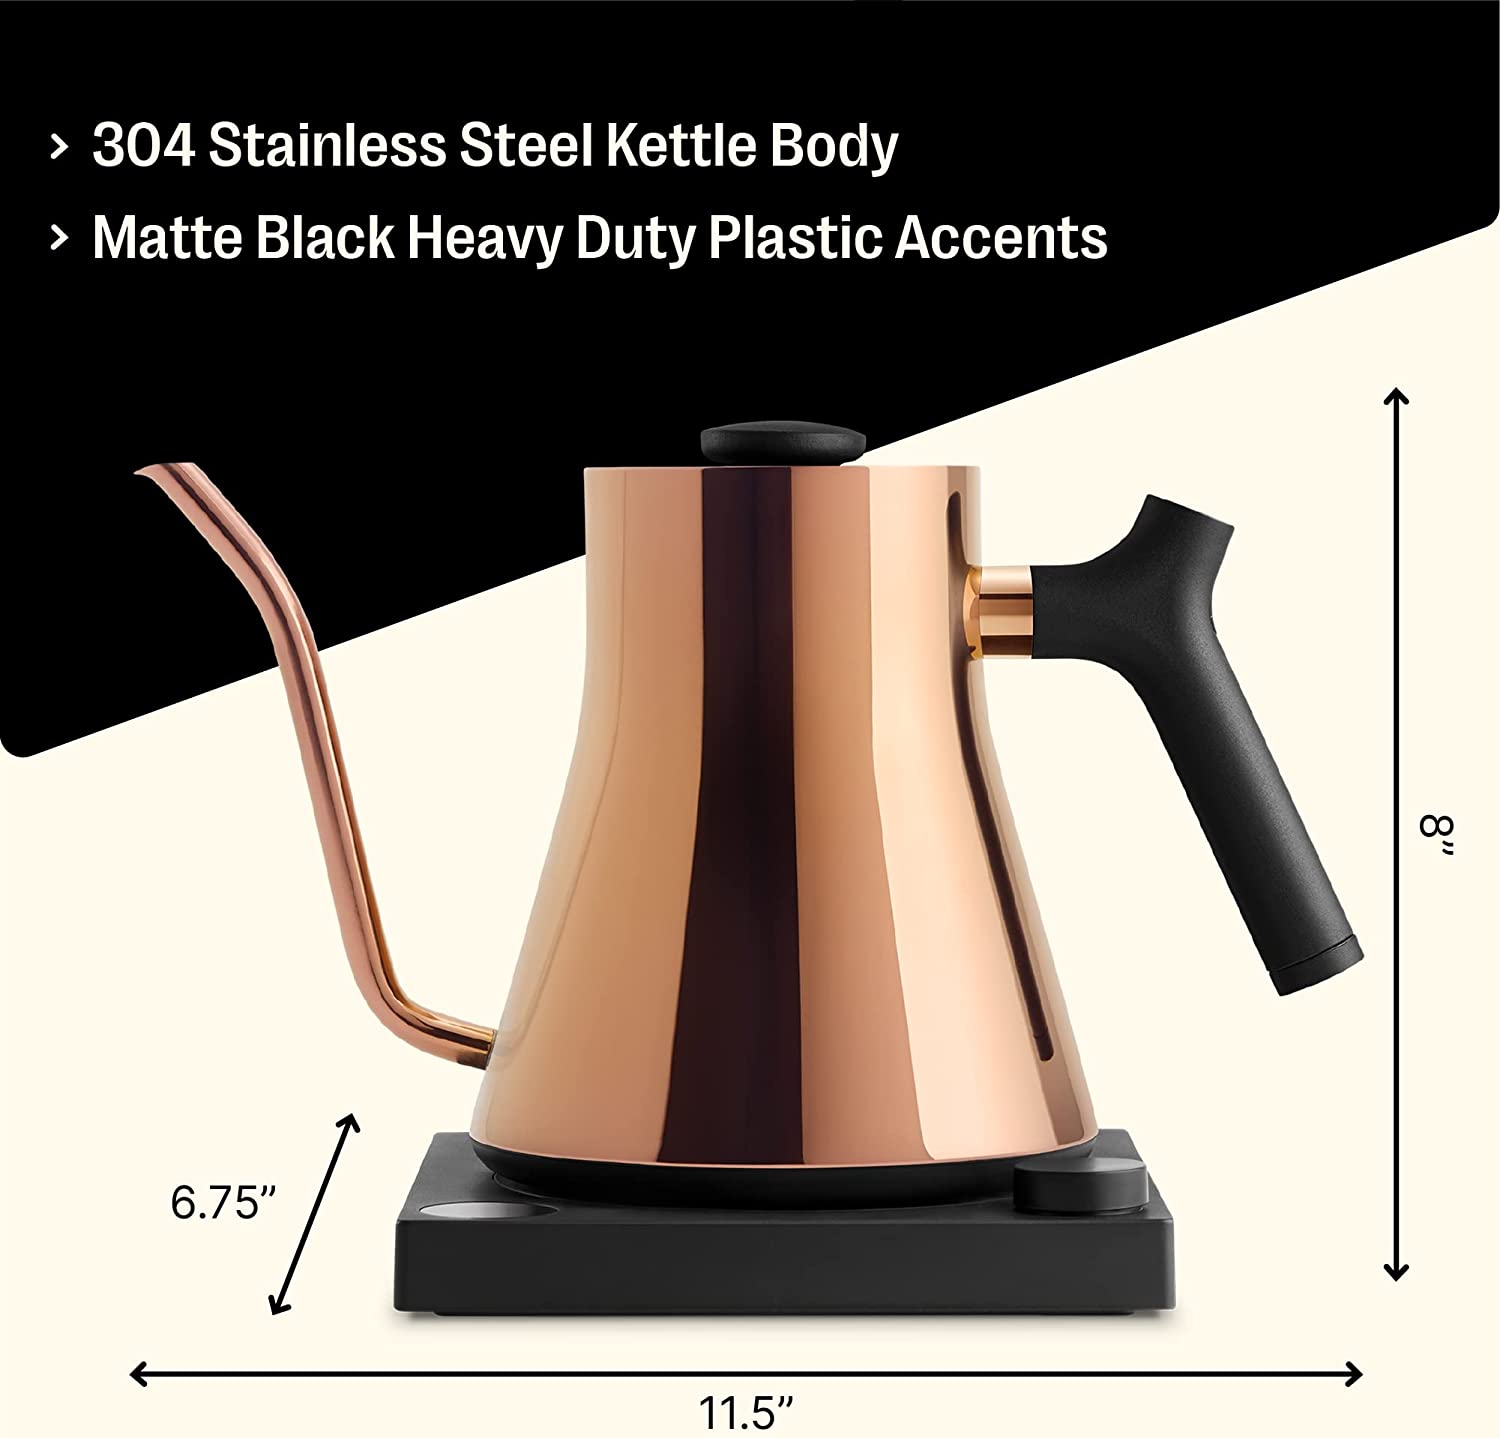 Ulalov Electric Gooseneck Kettle Ultra Fast Boiling Hot Water Kettle 100%  Stainless Steel for Pour-over Coffee & Tea, Leak-Proof Design, Auto Shutoff